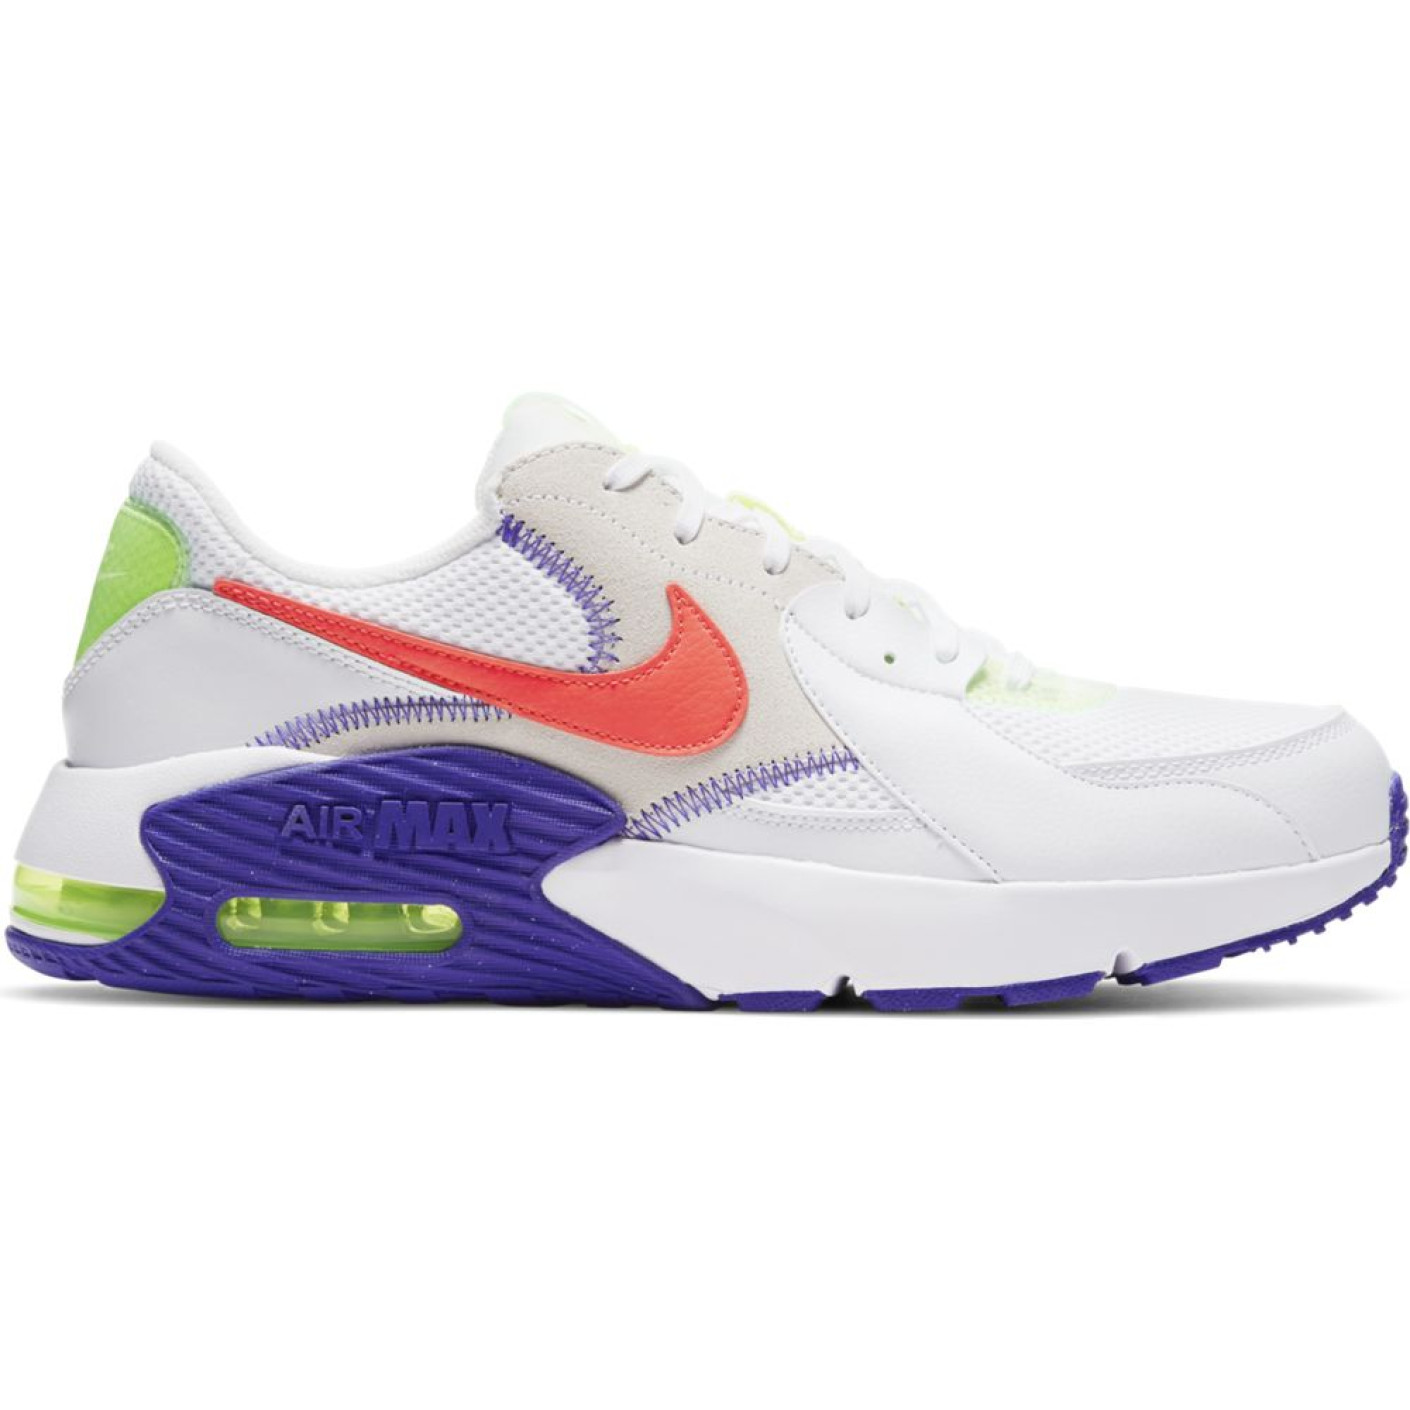 Groot Orthodox thuis Nike Air Max Excee Sneakers Wit Rood Blauw Volt